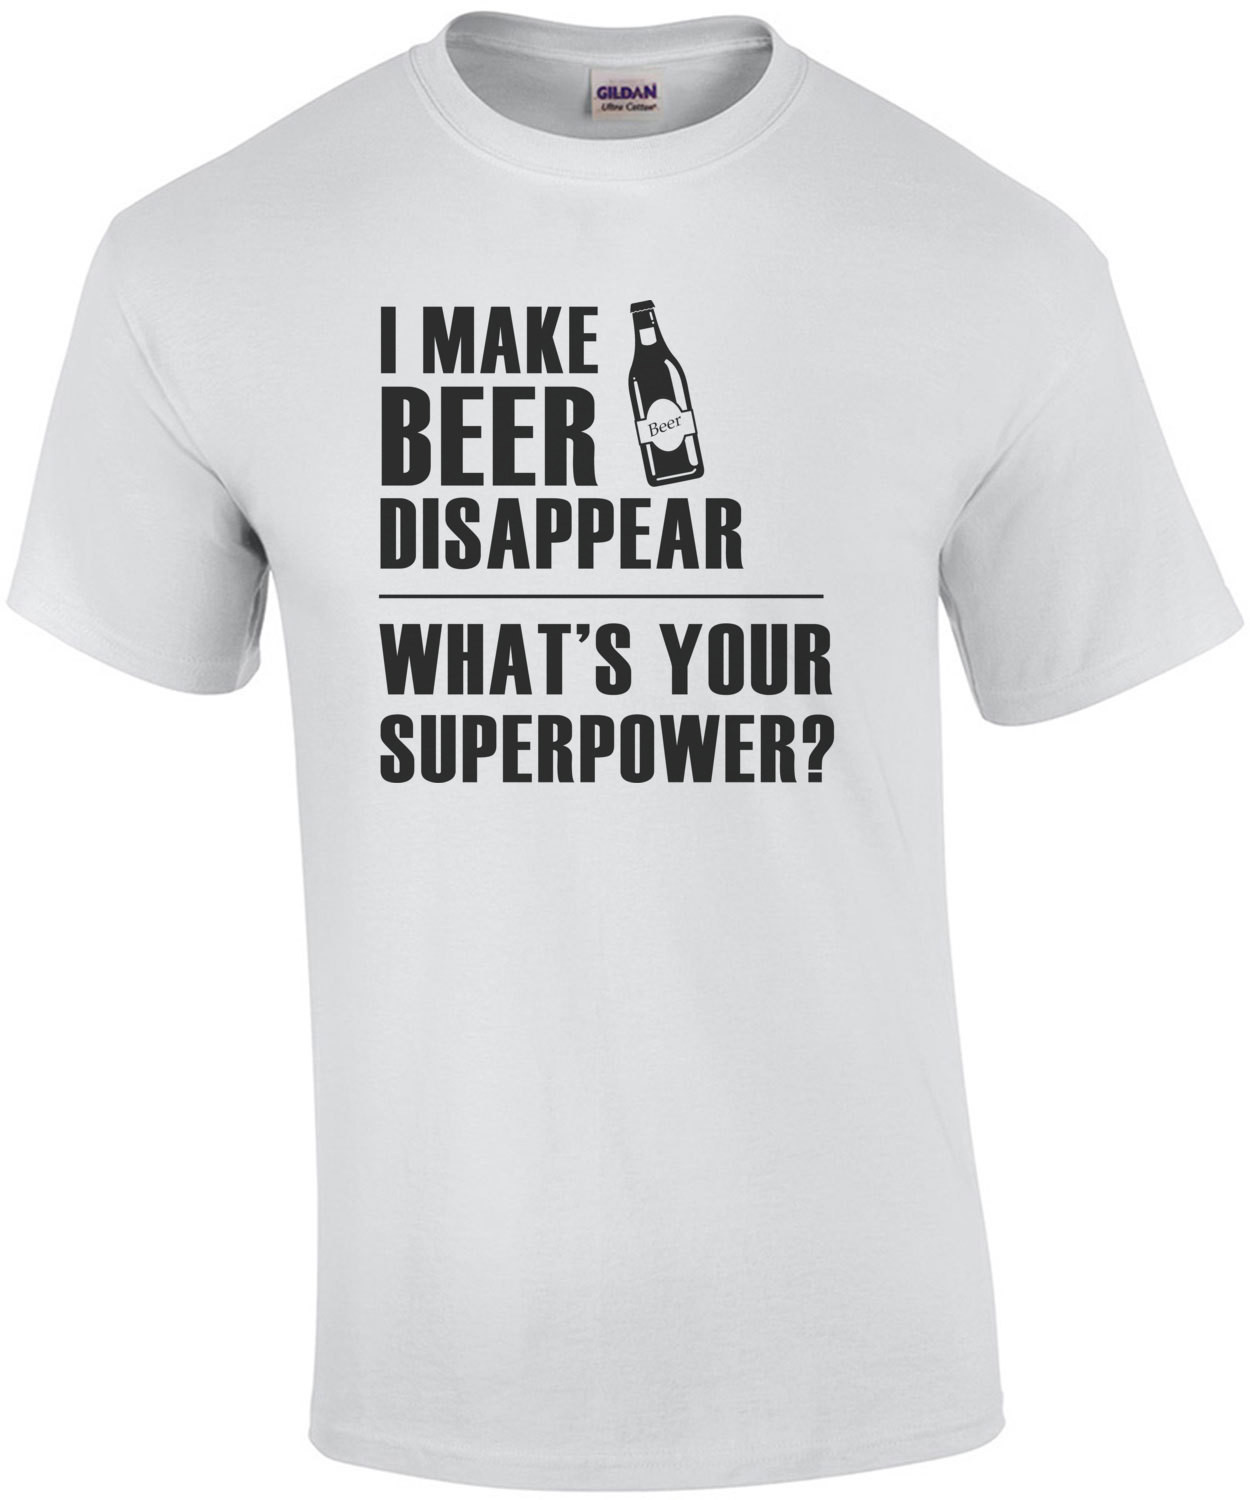 I make beer disappear - what's your superpower? Funny Beer T-Shirt